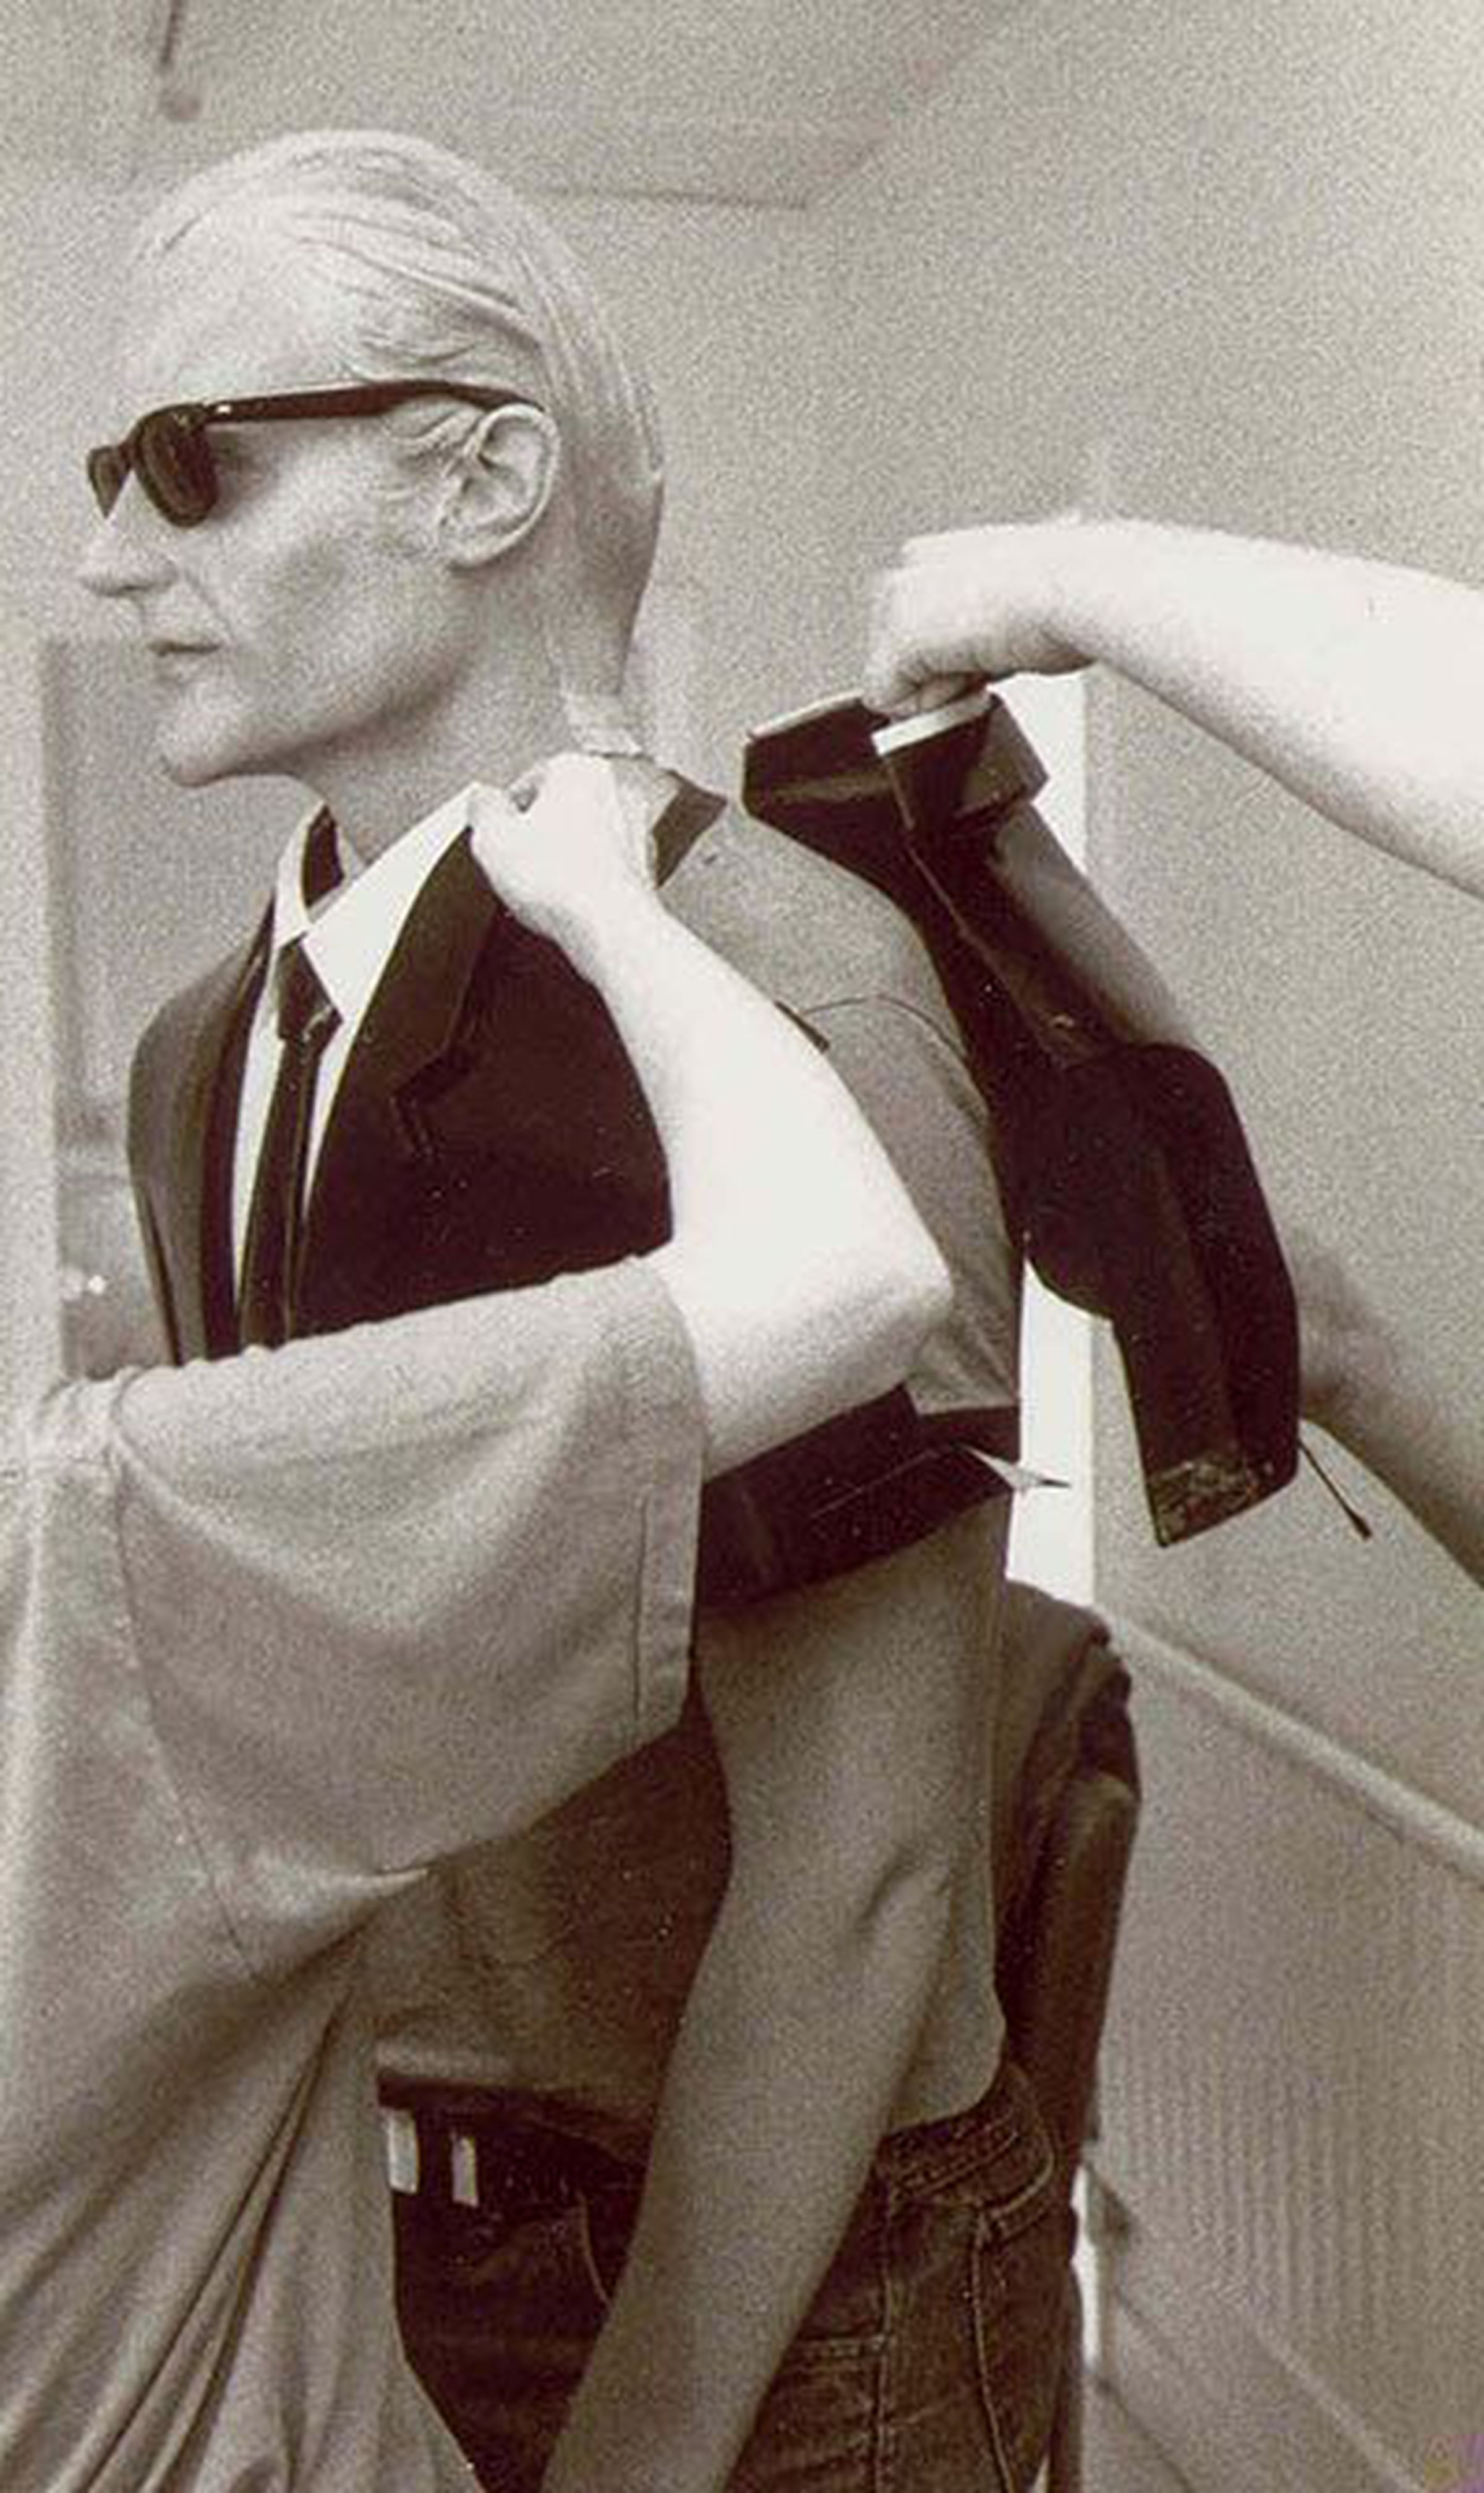 The make-up and design of Max Headroom